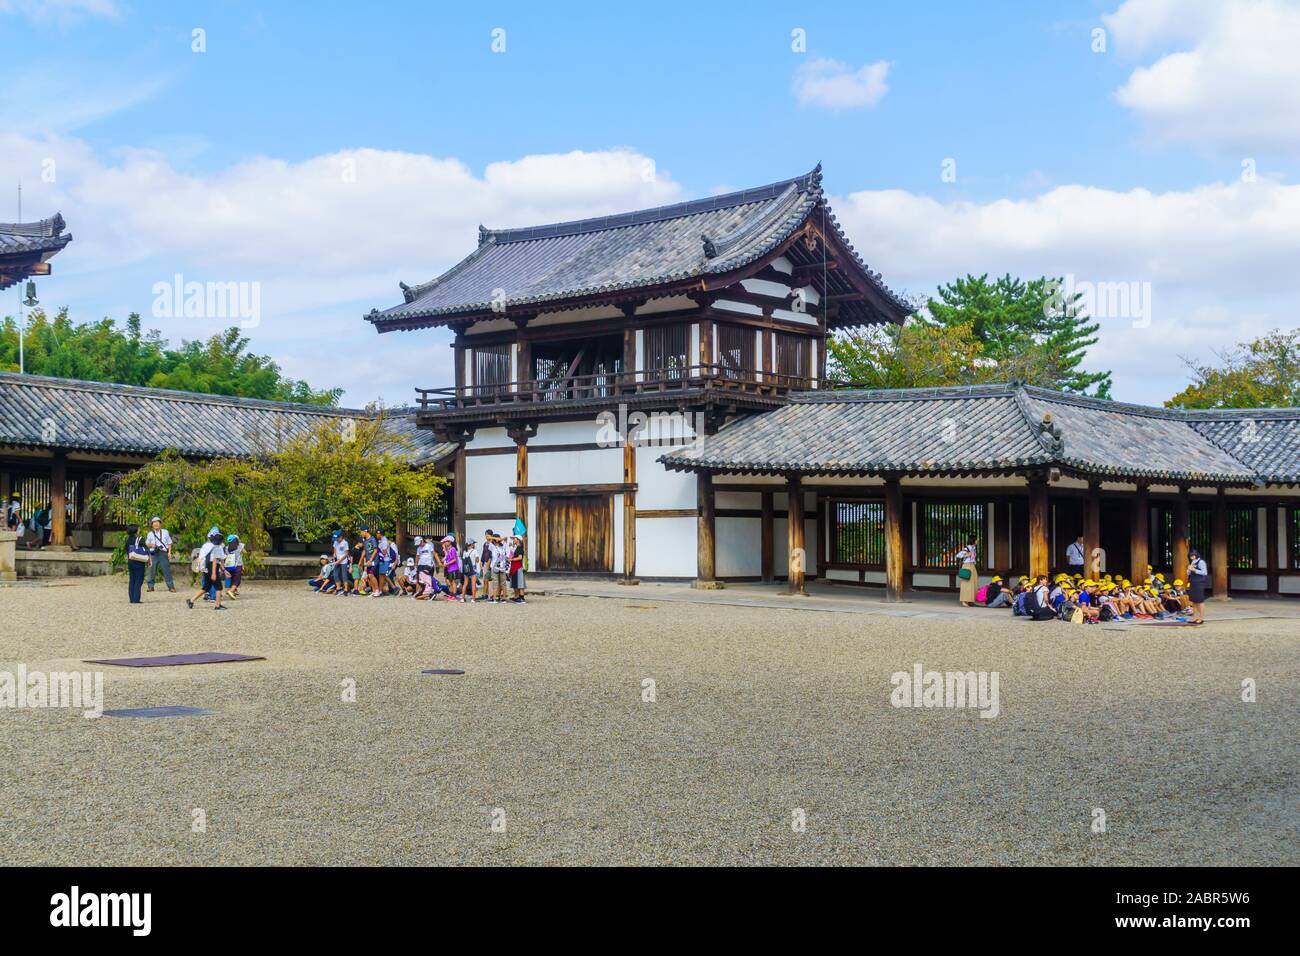 Ikaruga, Japan - October 5, 2019: View of the Horyu-ji compound, with visitors, it is a Buddhist temple in Ikaruga, Nara prefecture, Japan Stock Photo